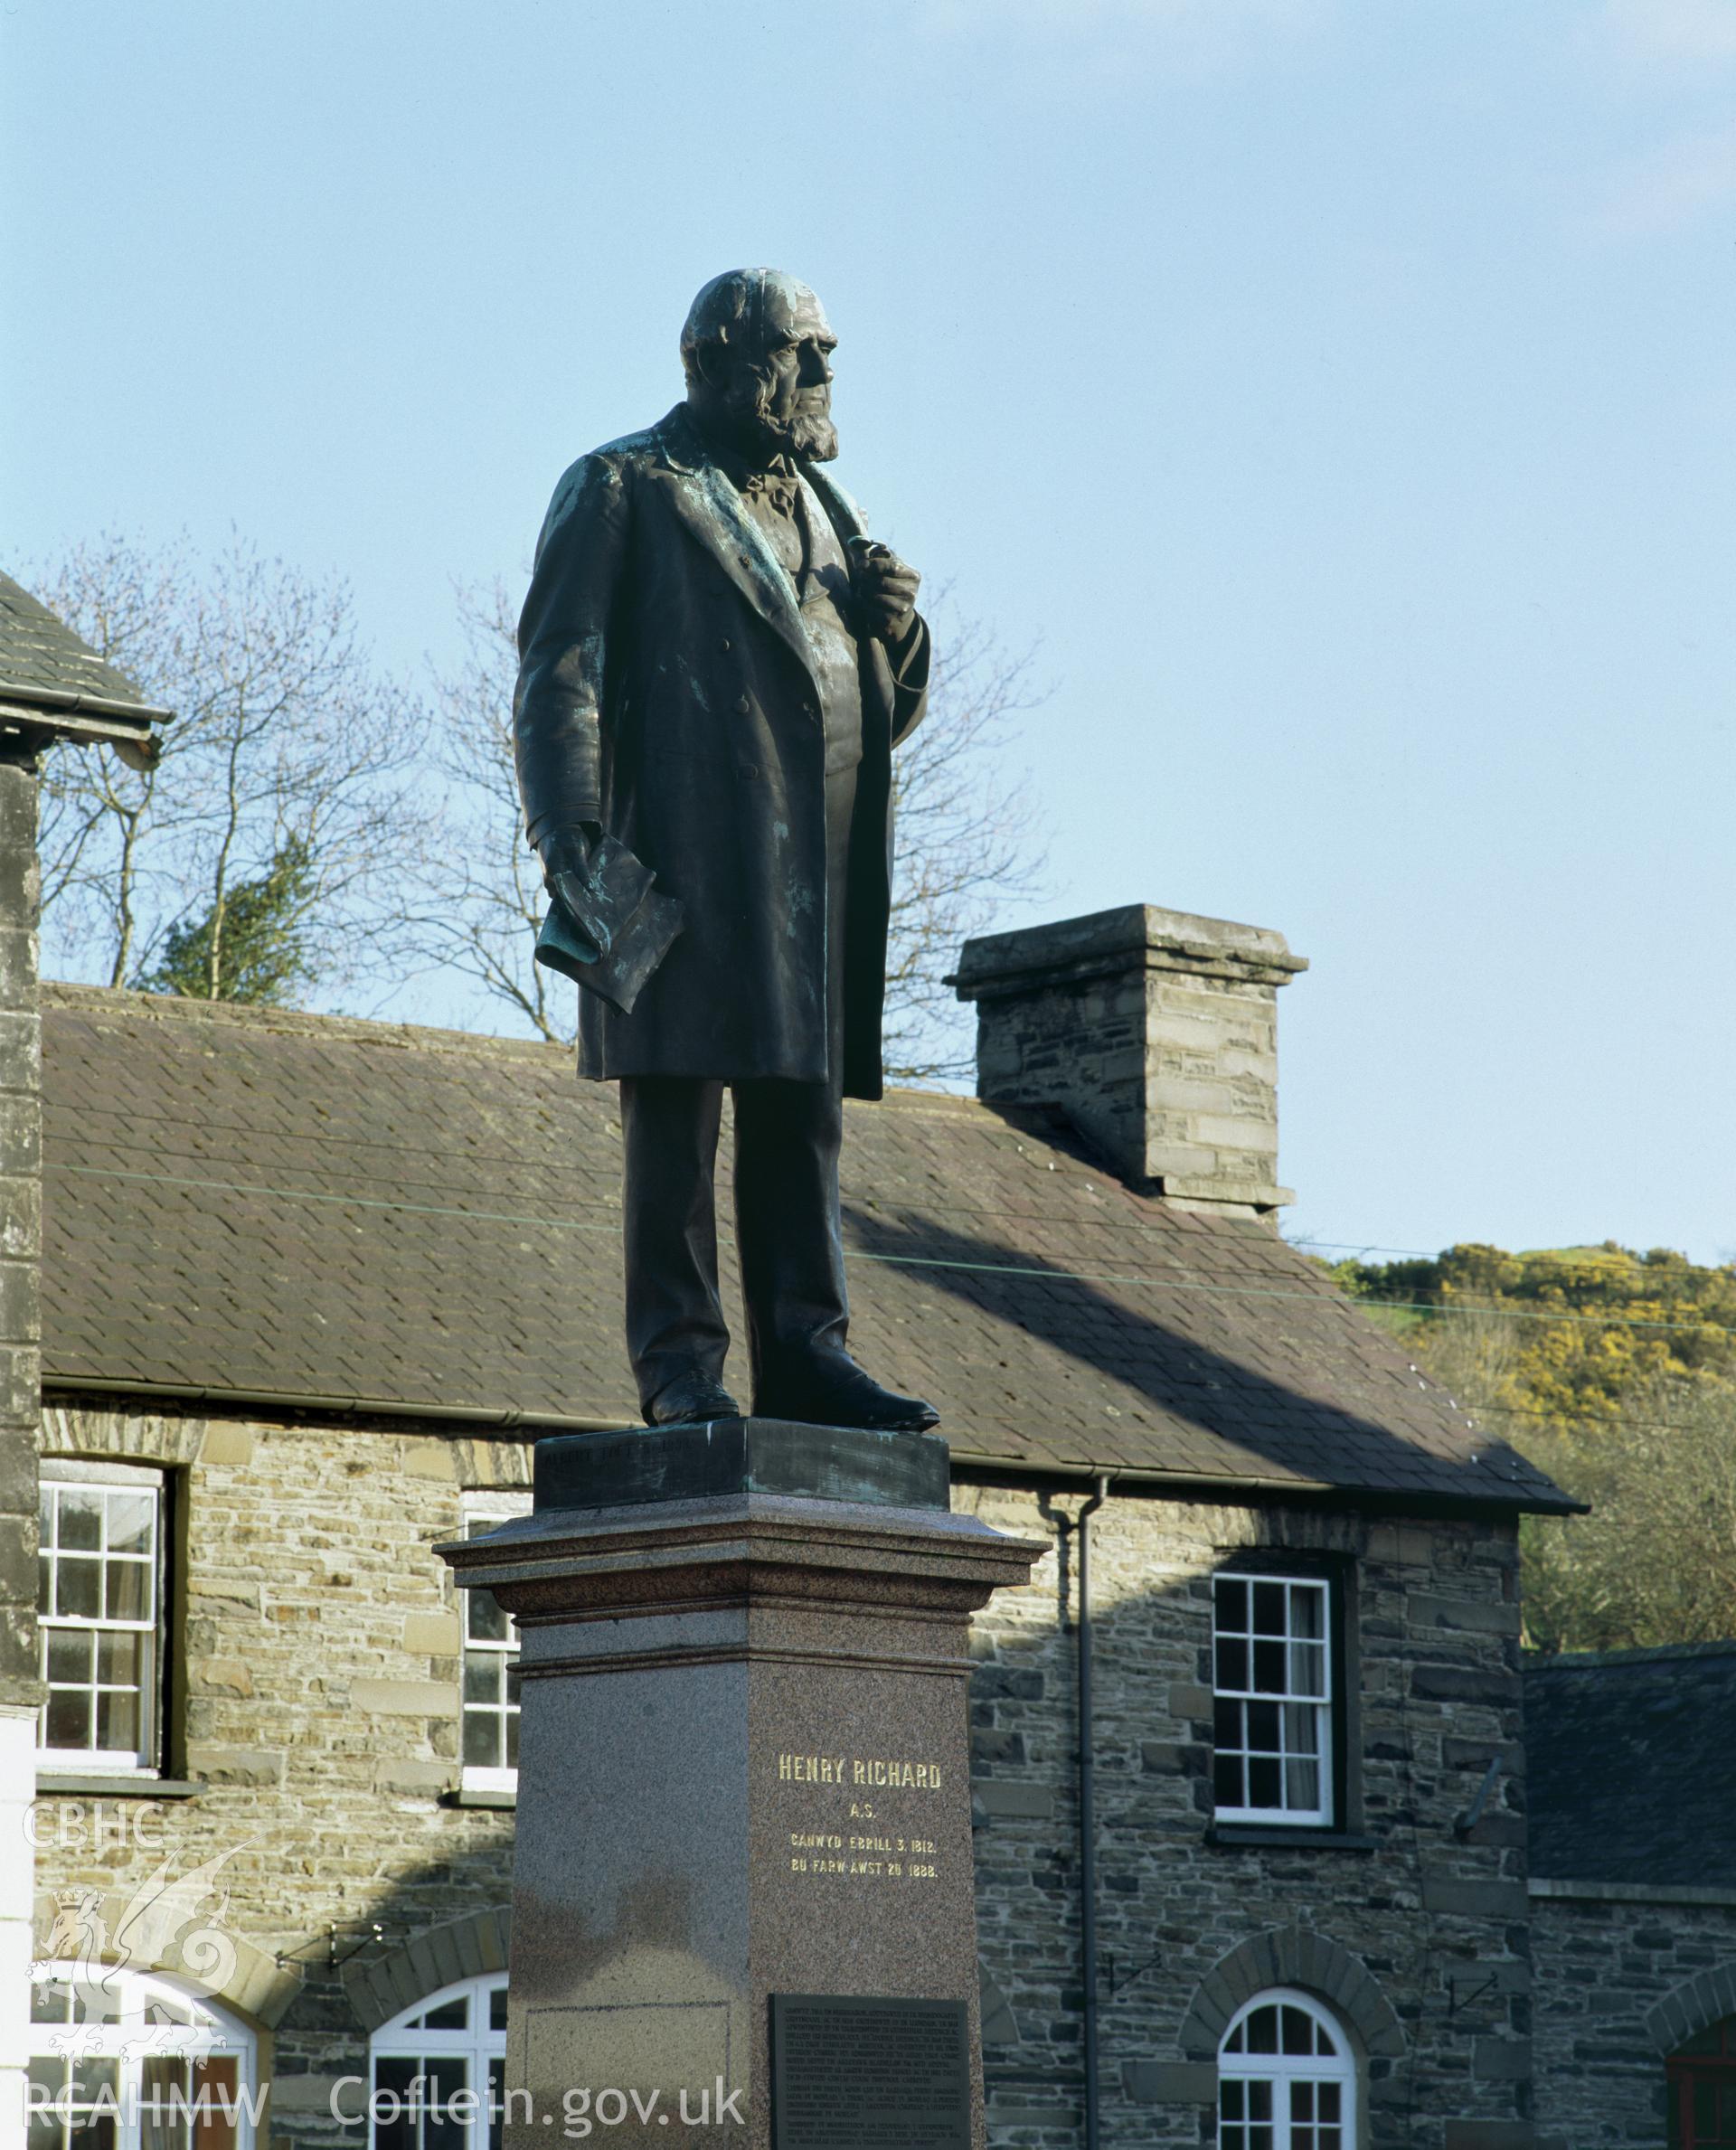 Colour transparency showing statue of Henry Richards, Tregaron, produced by Iain Wright, June 2004.